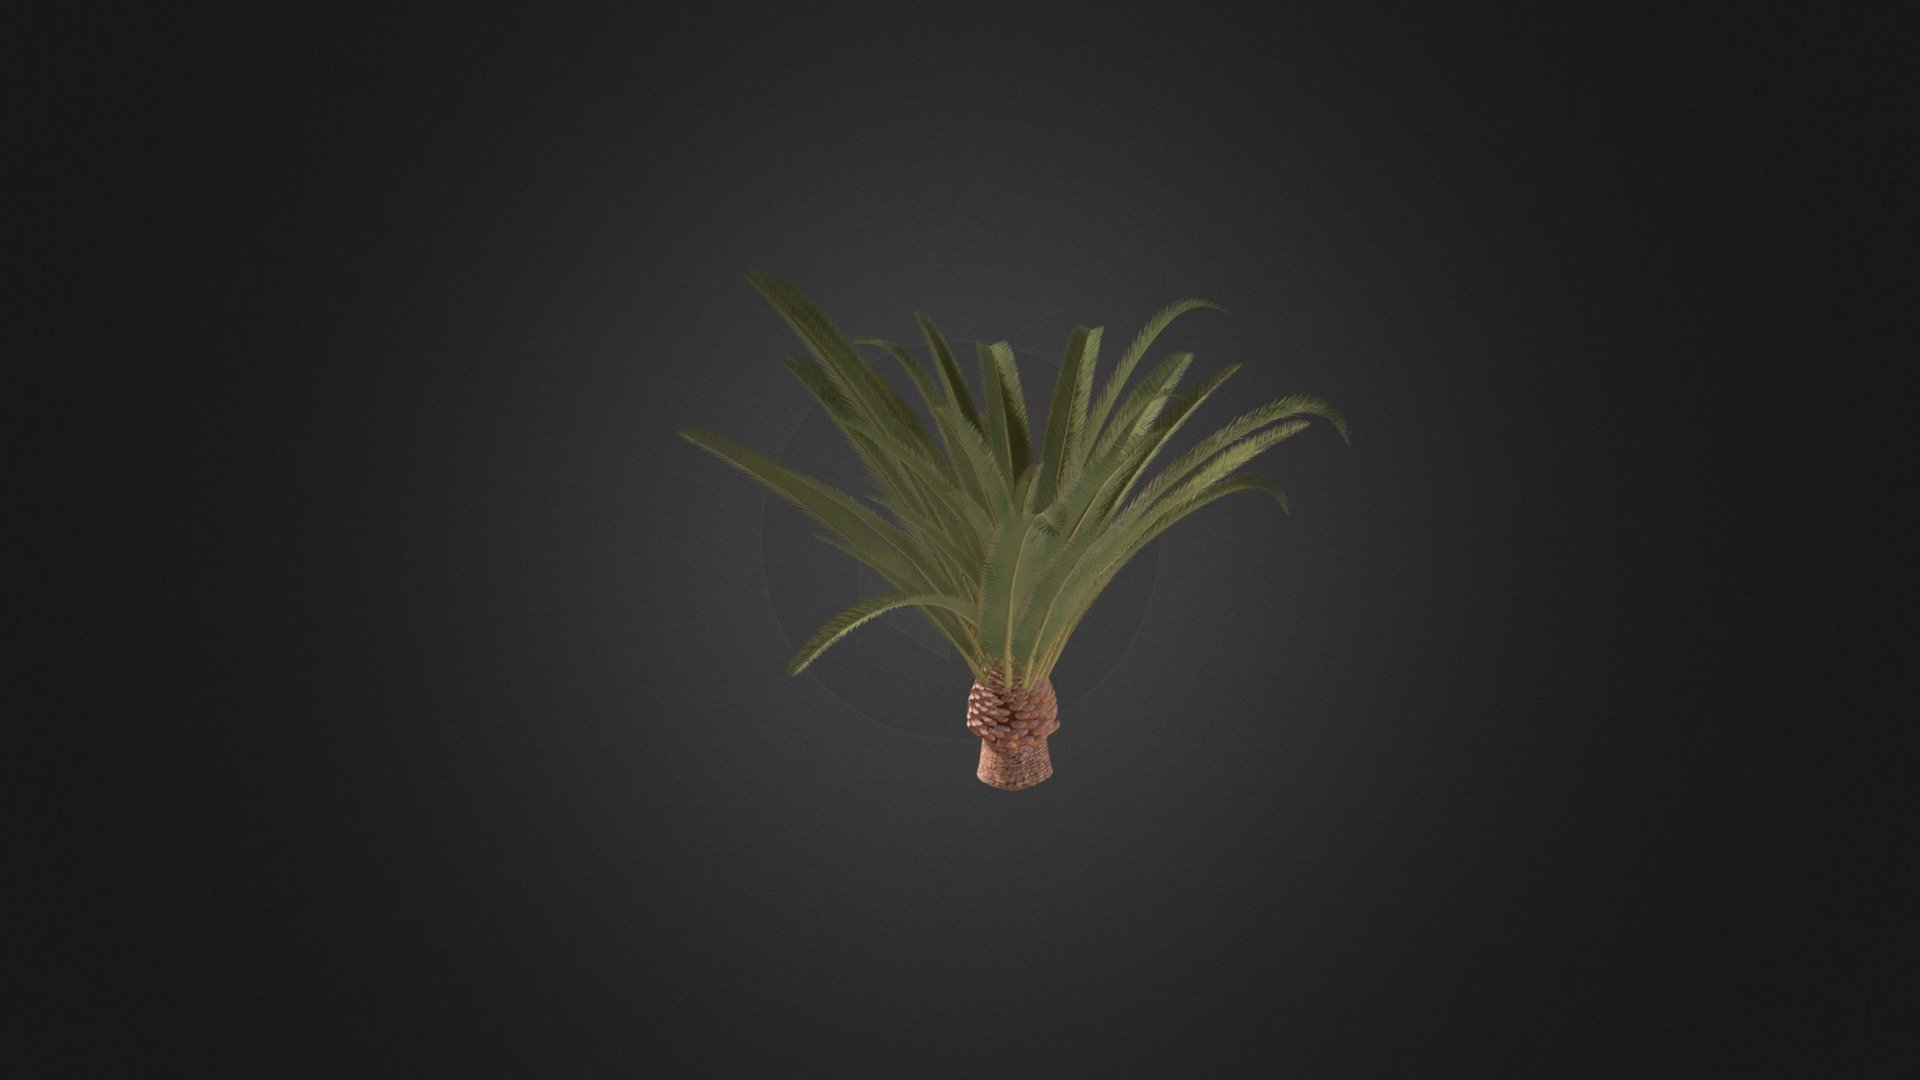 3d model of low pineapple palm tree (Phoenix canariensis). Compatible with3ds max 2010 or higher and many others 3d model